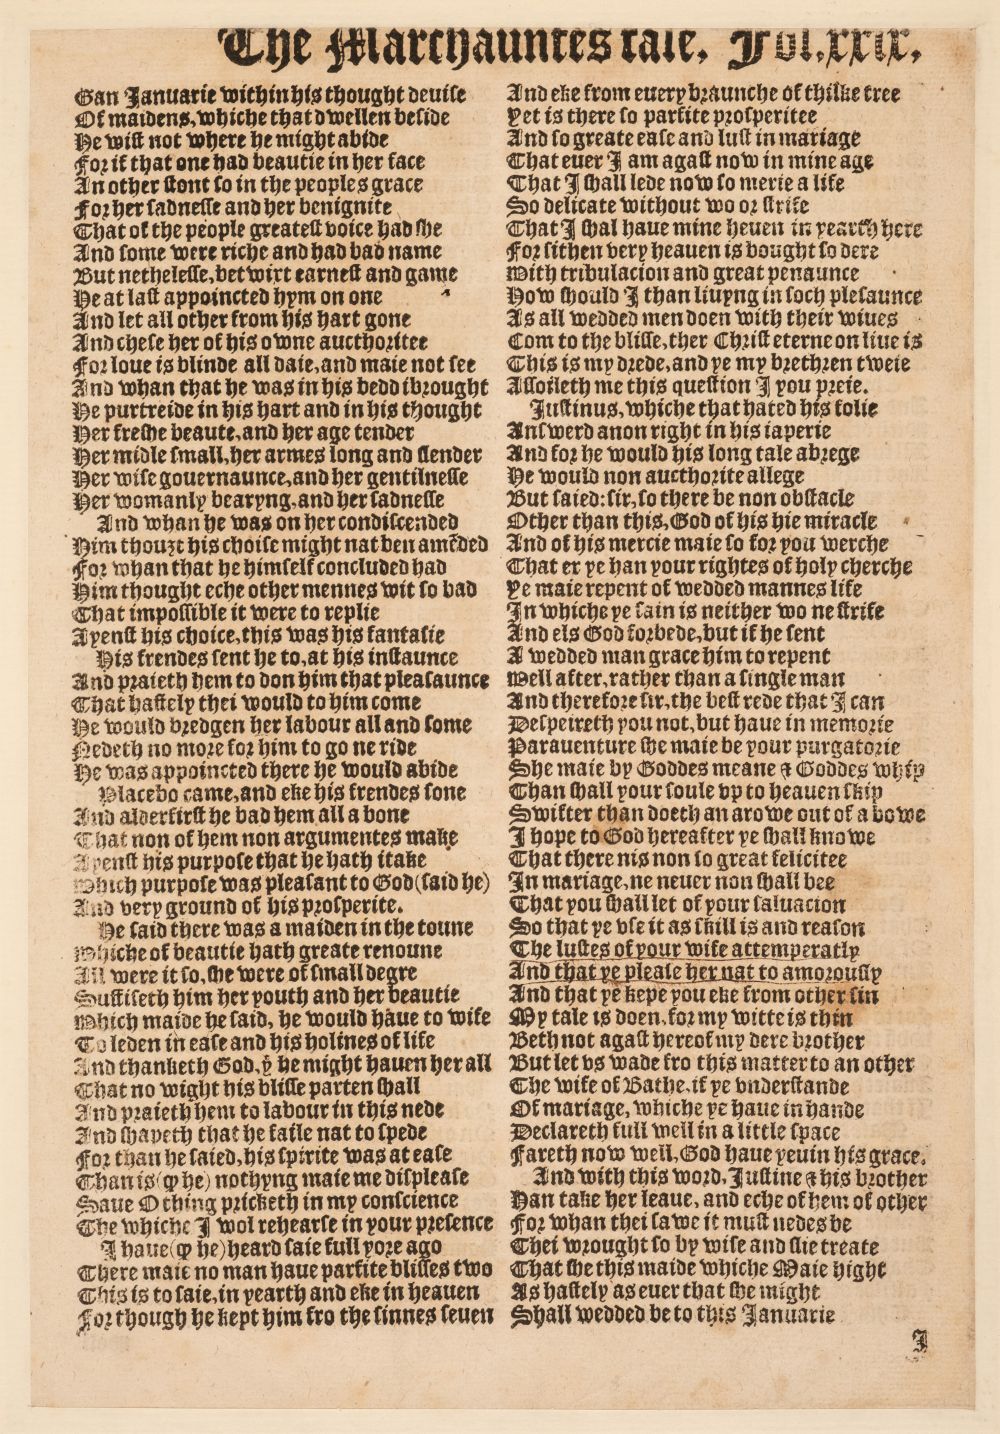 Chaucer (Geoffrey). A folio leaf from Chaucer's Works, 1561, and three other 16th century titles